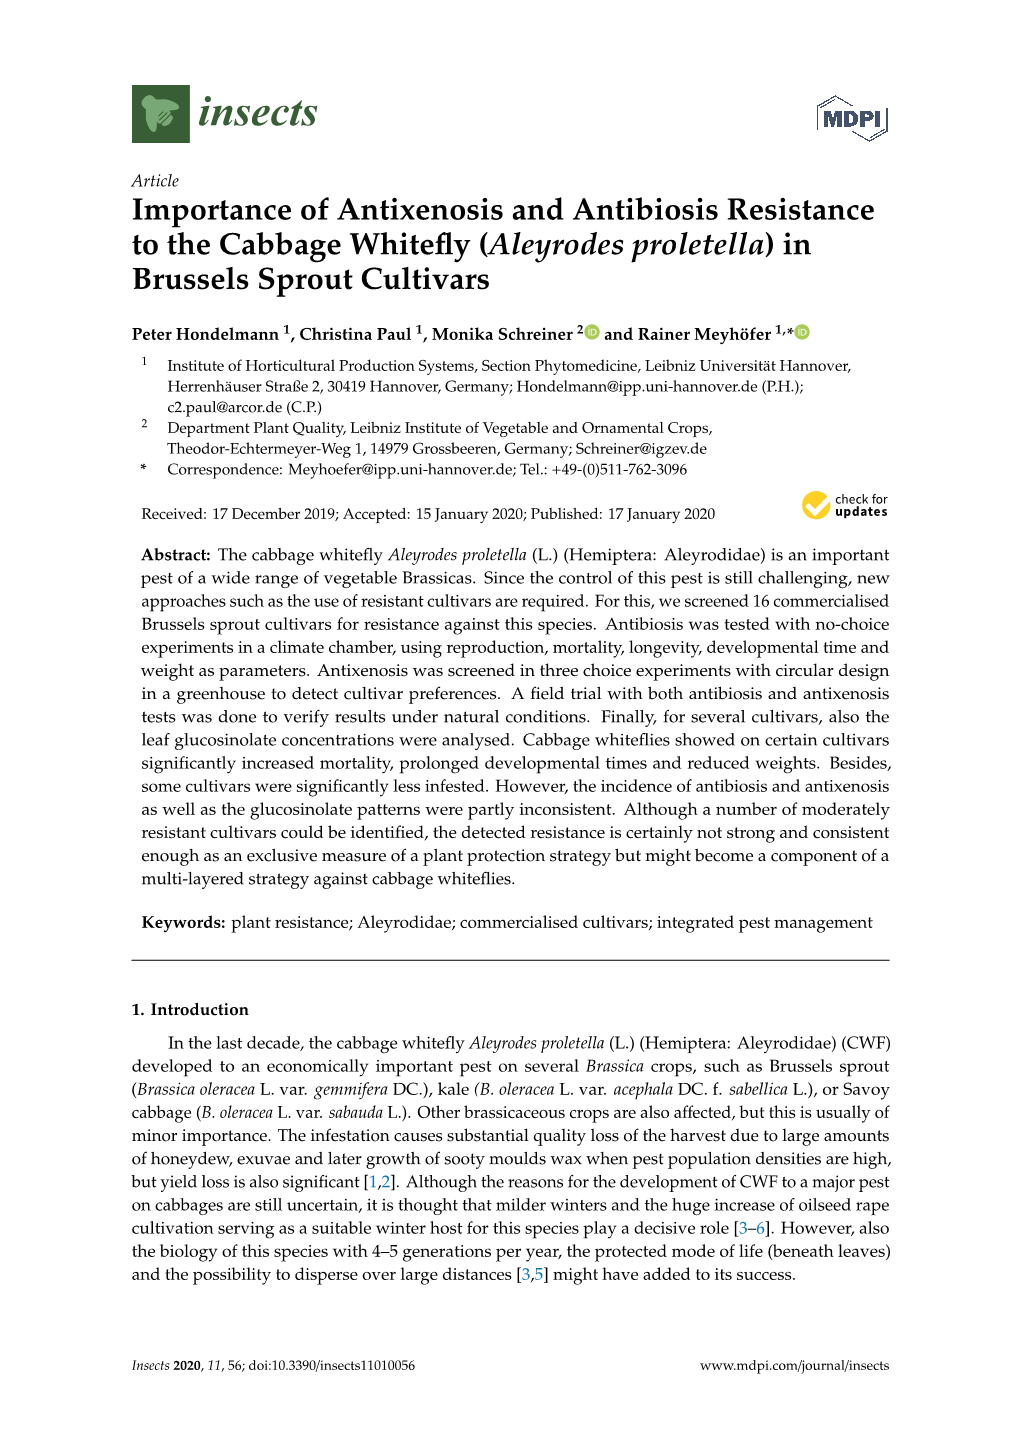 Importance of Antixenosis and Antibiosis Resistance to the Cabbage Whiteﬂy (Aleyrodes Proletella) in Brussels Sprout Cultivars